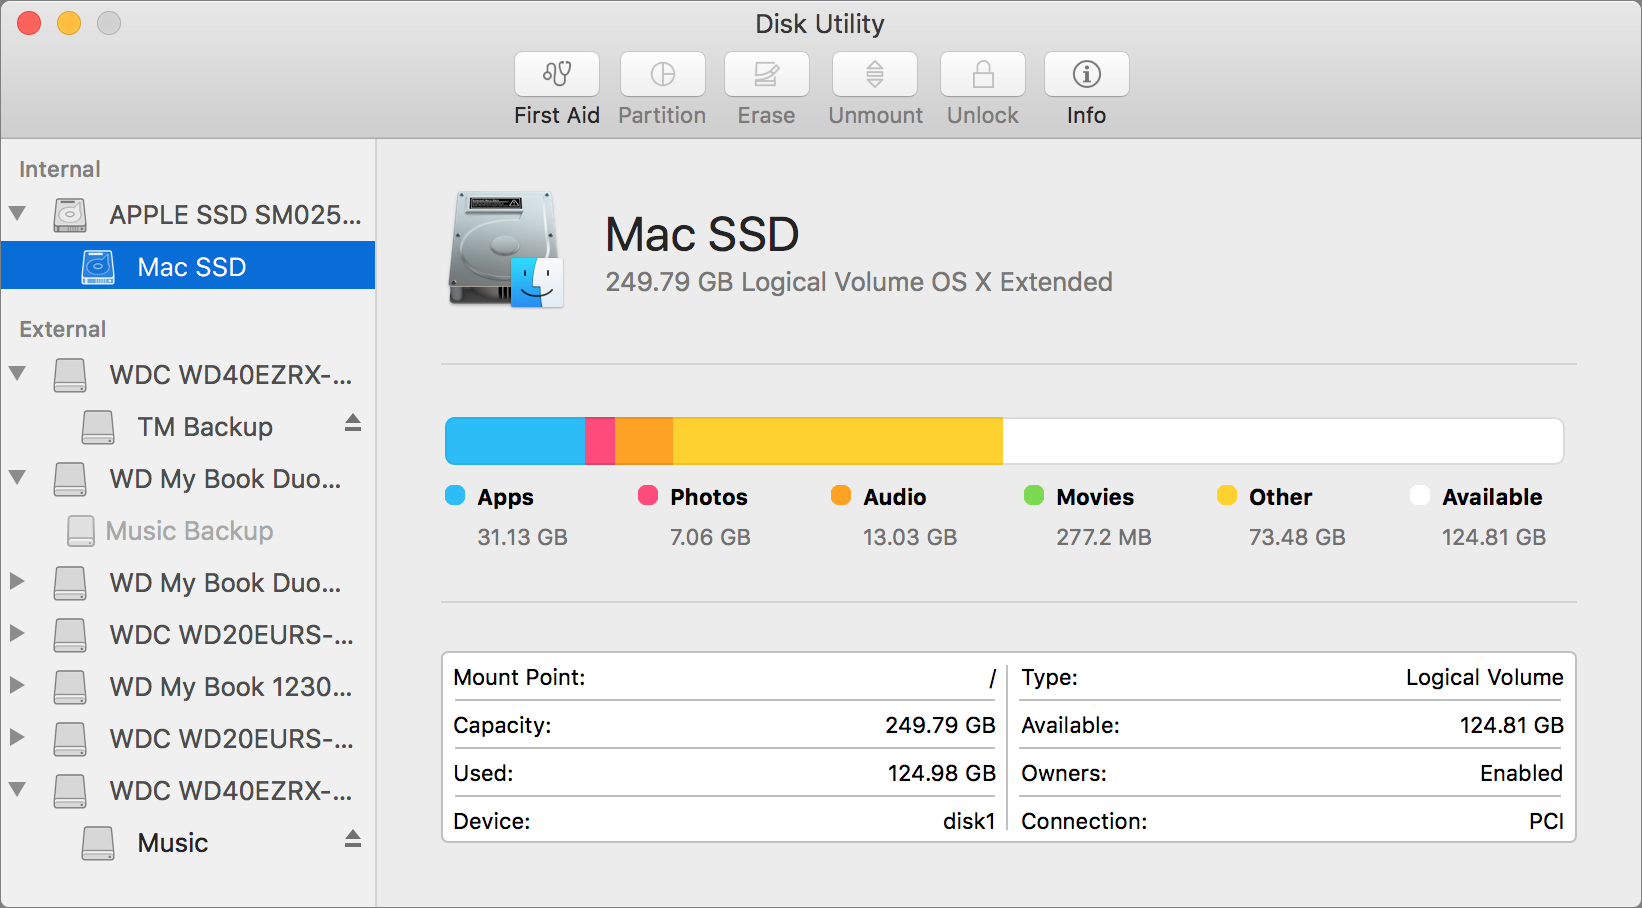 motif pedestal grandmother How to Manage Disks and Volumes with OS X's Disk Utility - The Mac Security  Blog